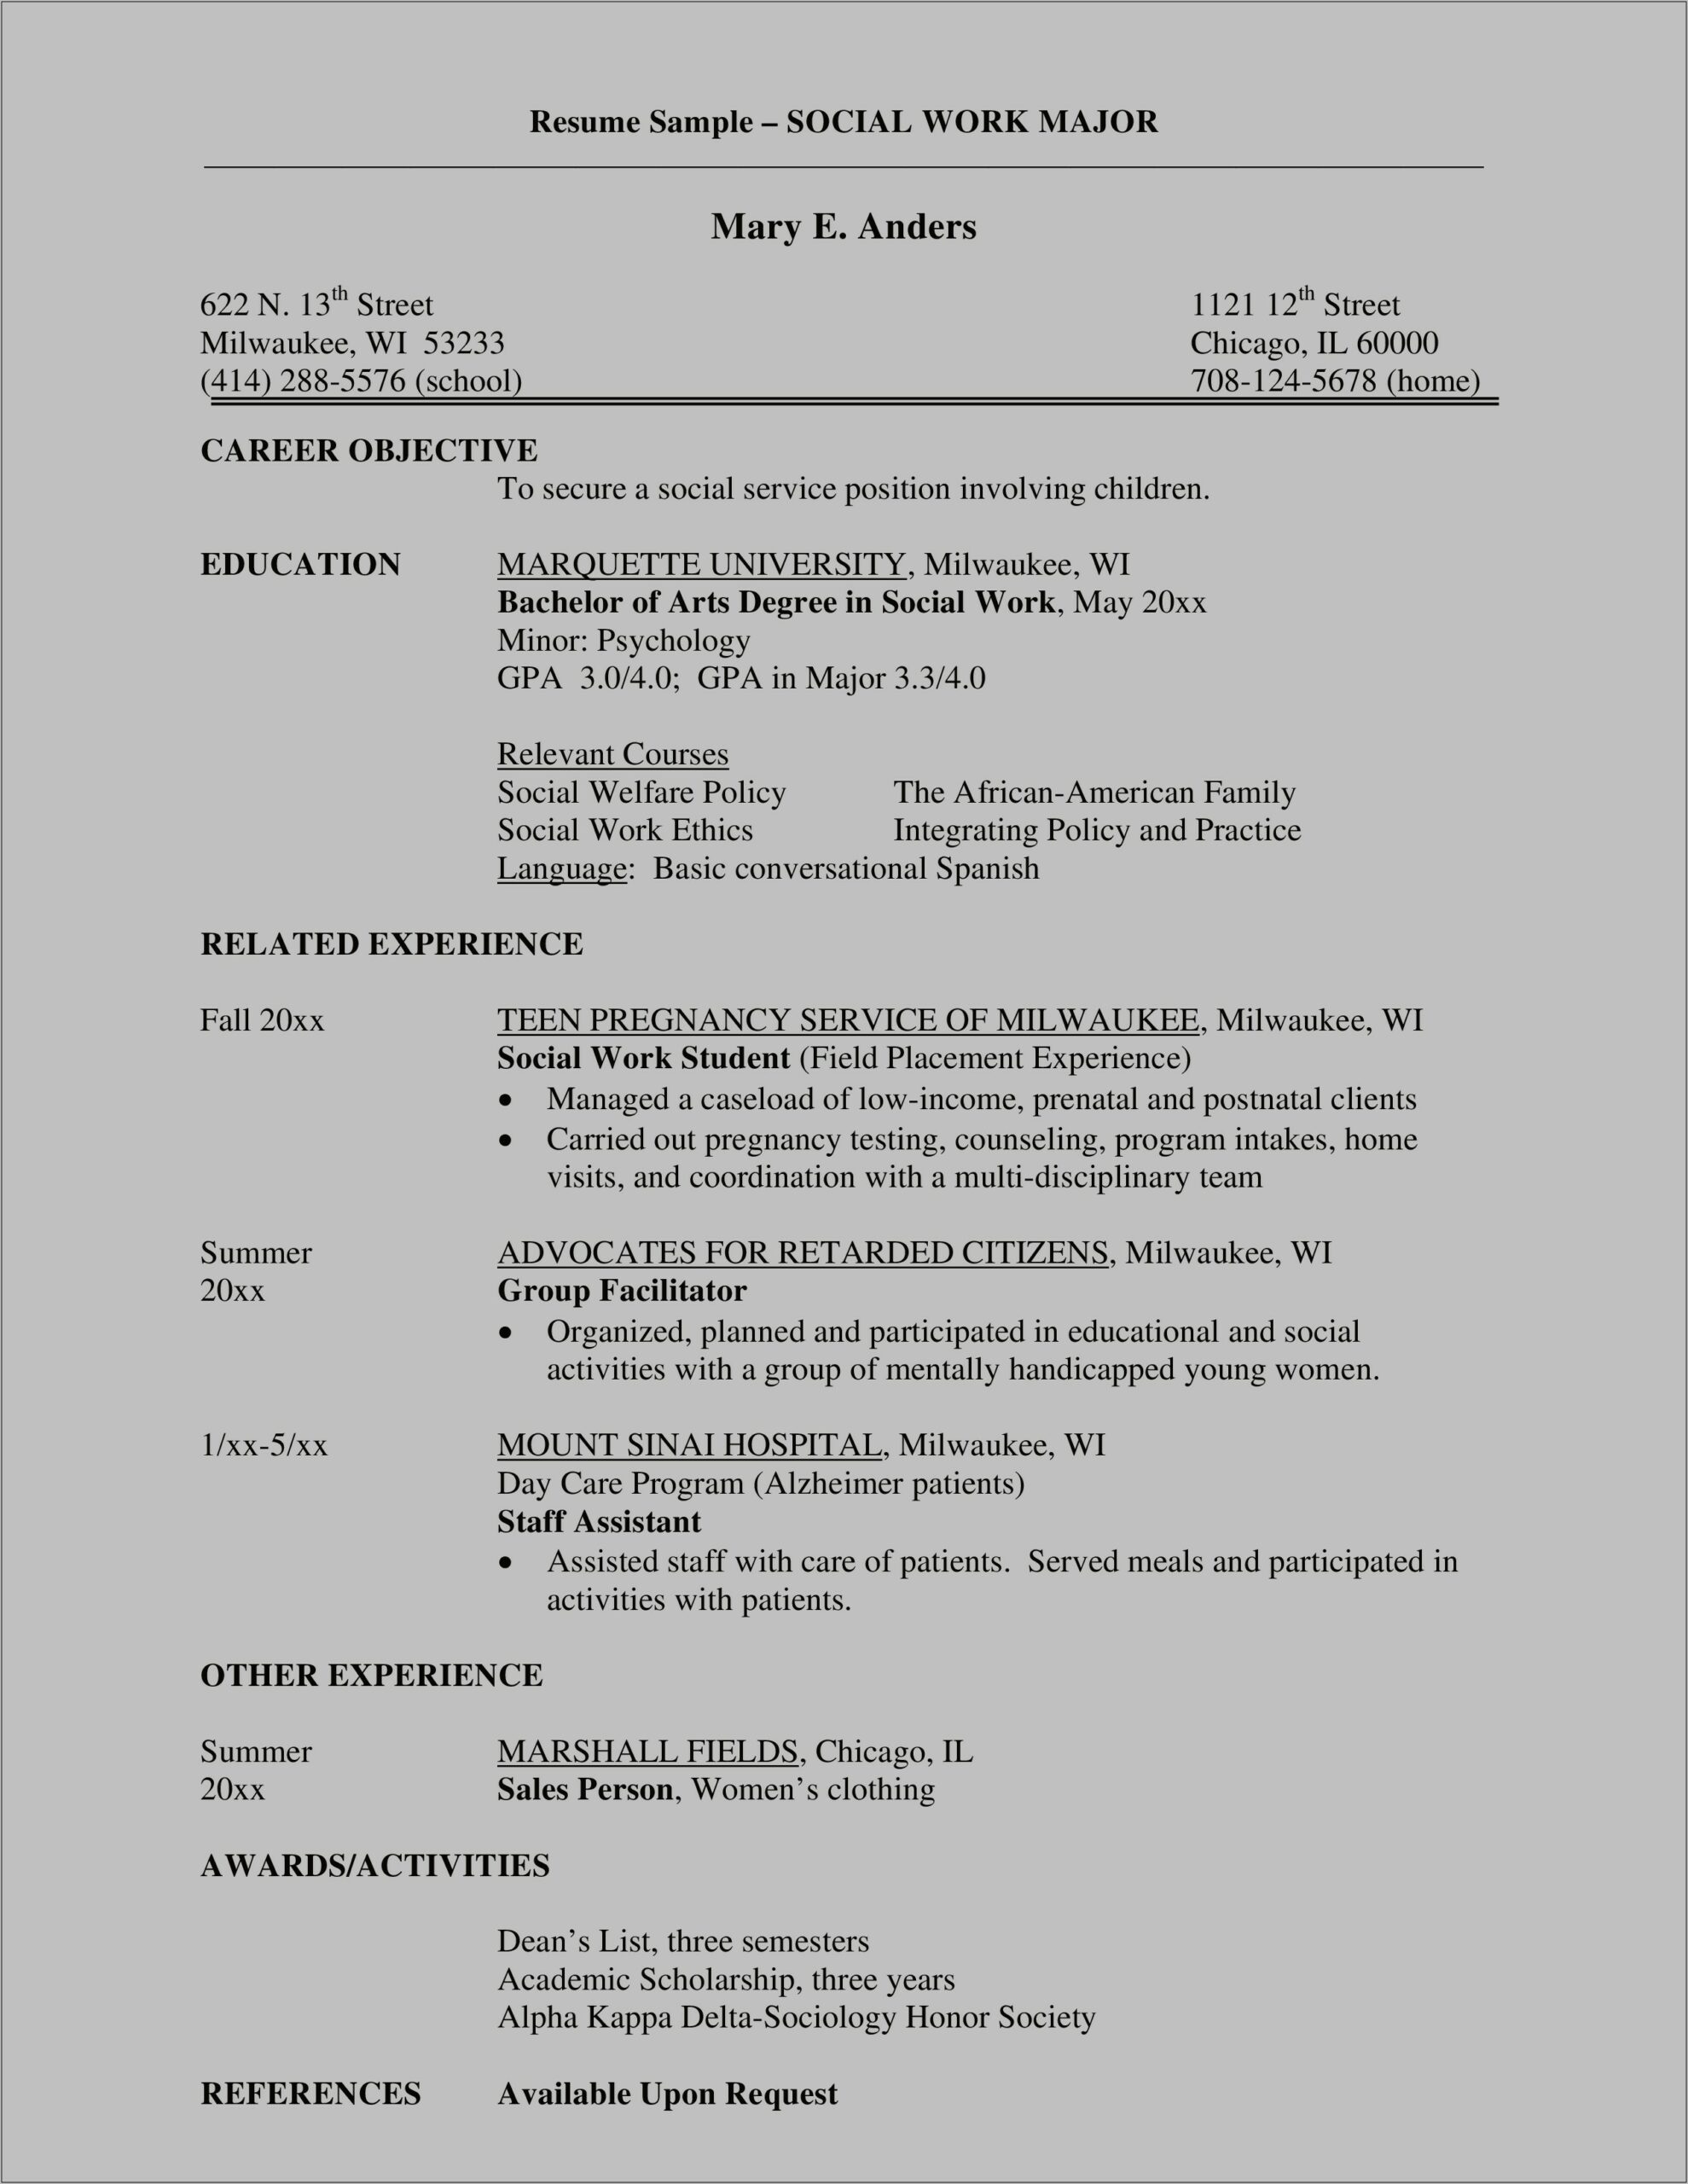 Resume Objective For Social Services Job